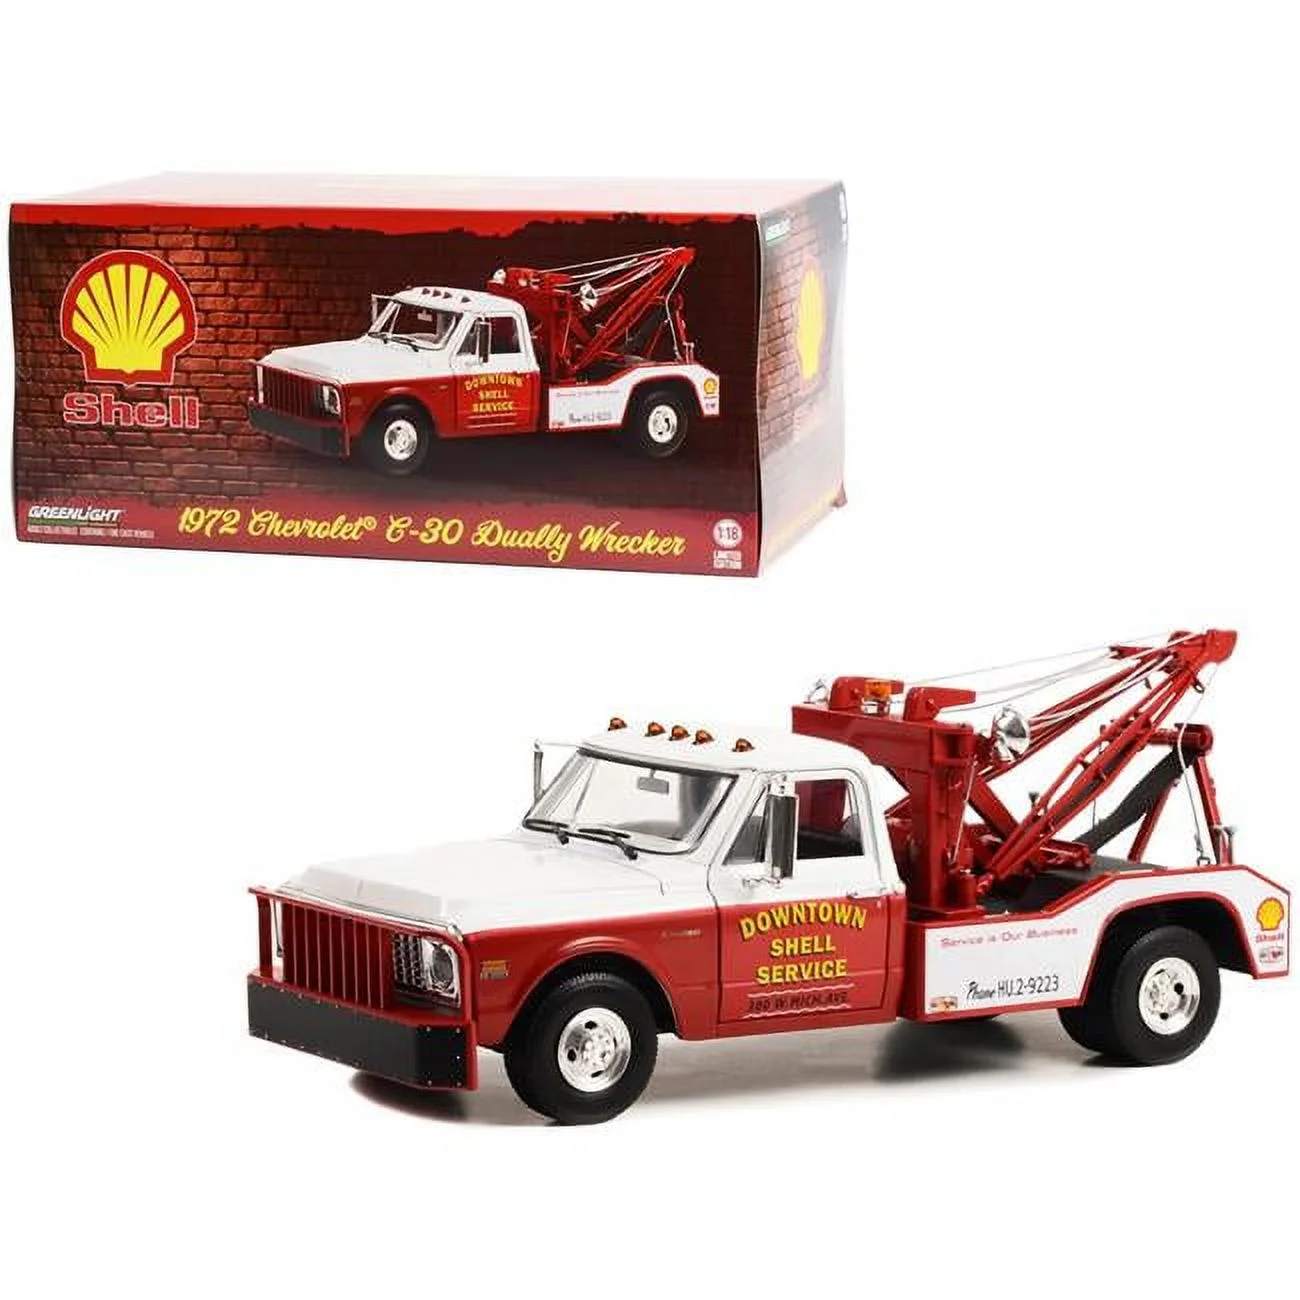 Greenlight 1/18 1972 Chevrolet C-30 Dually Wrecker - Downtown Shell Service “Service is Our Business” 13654